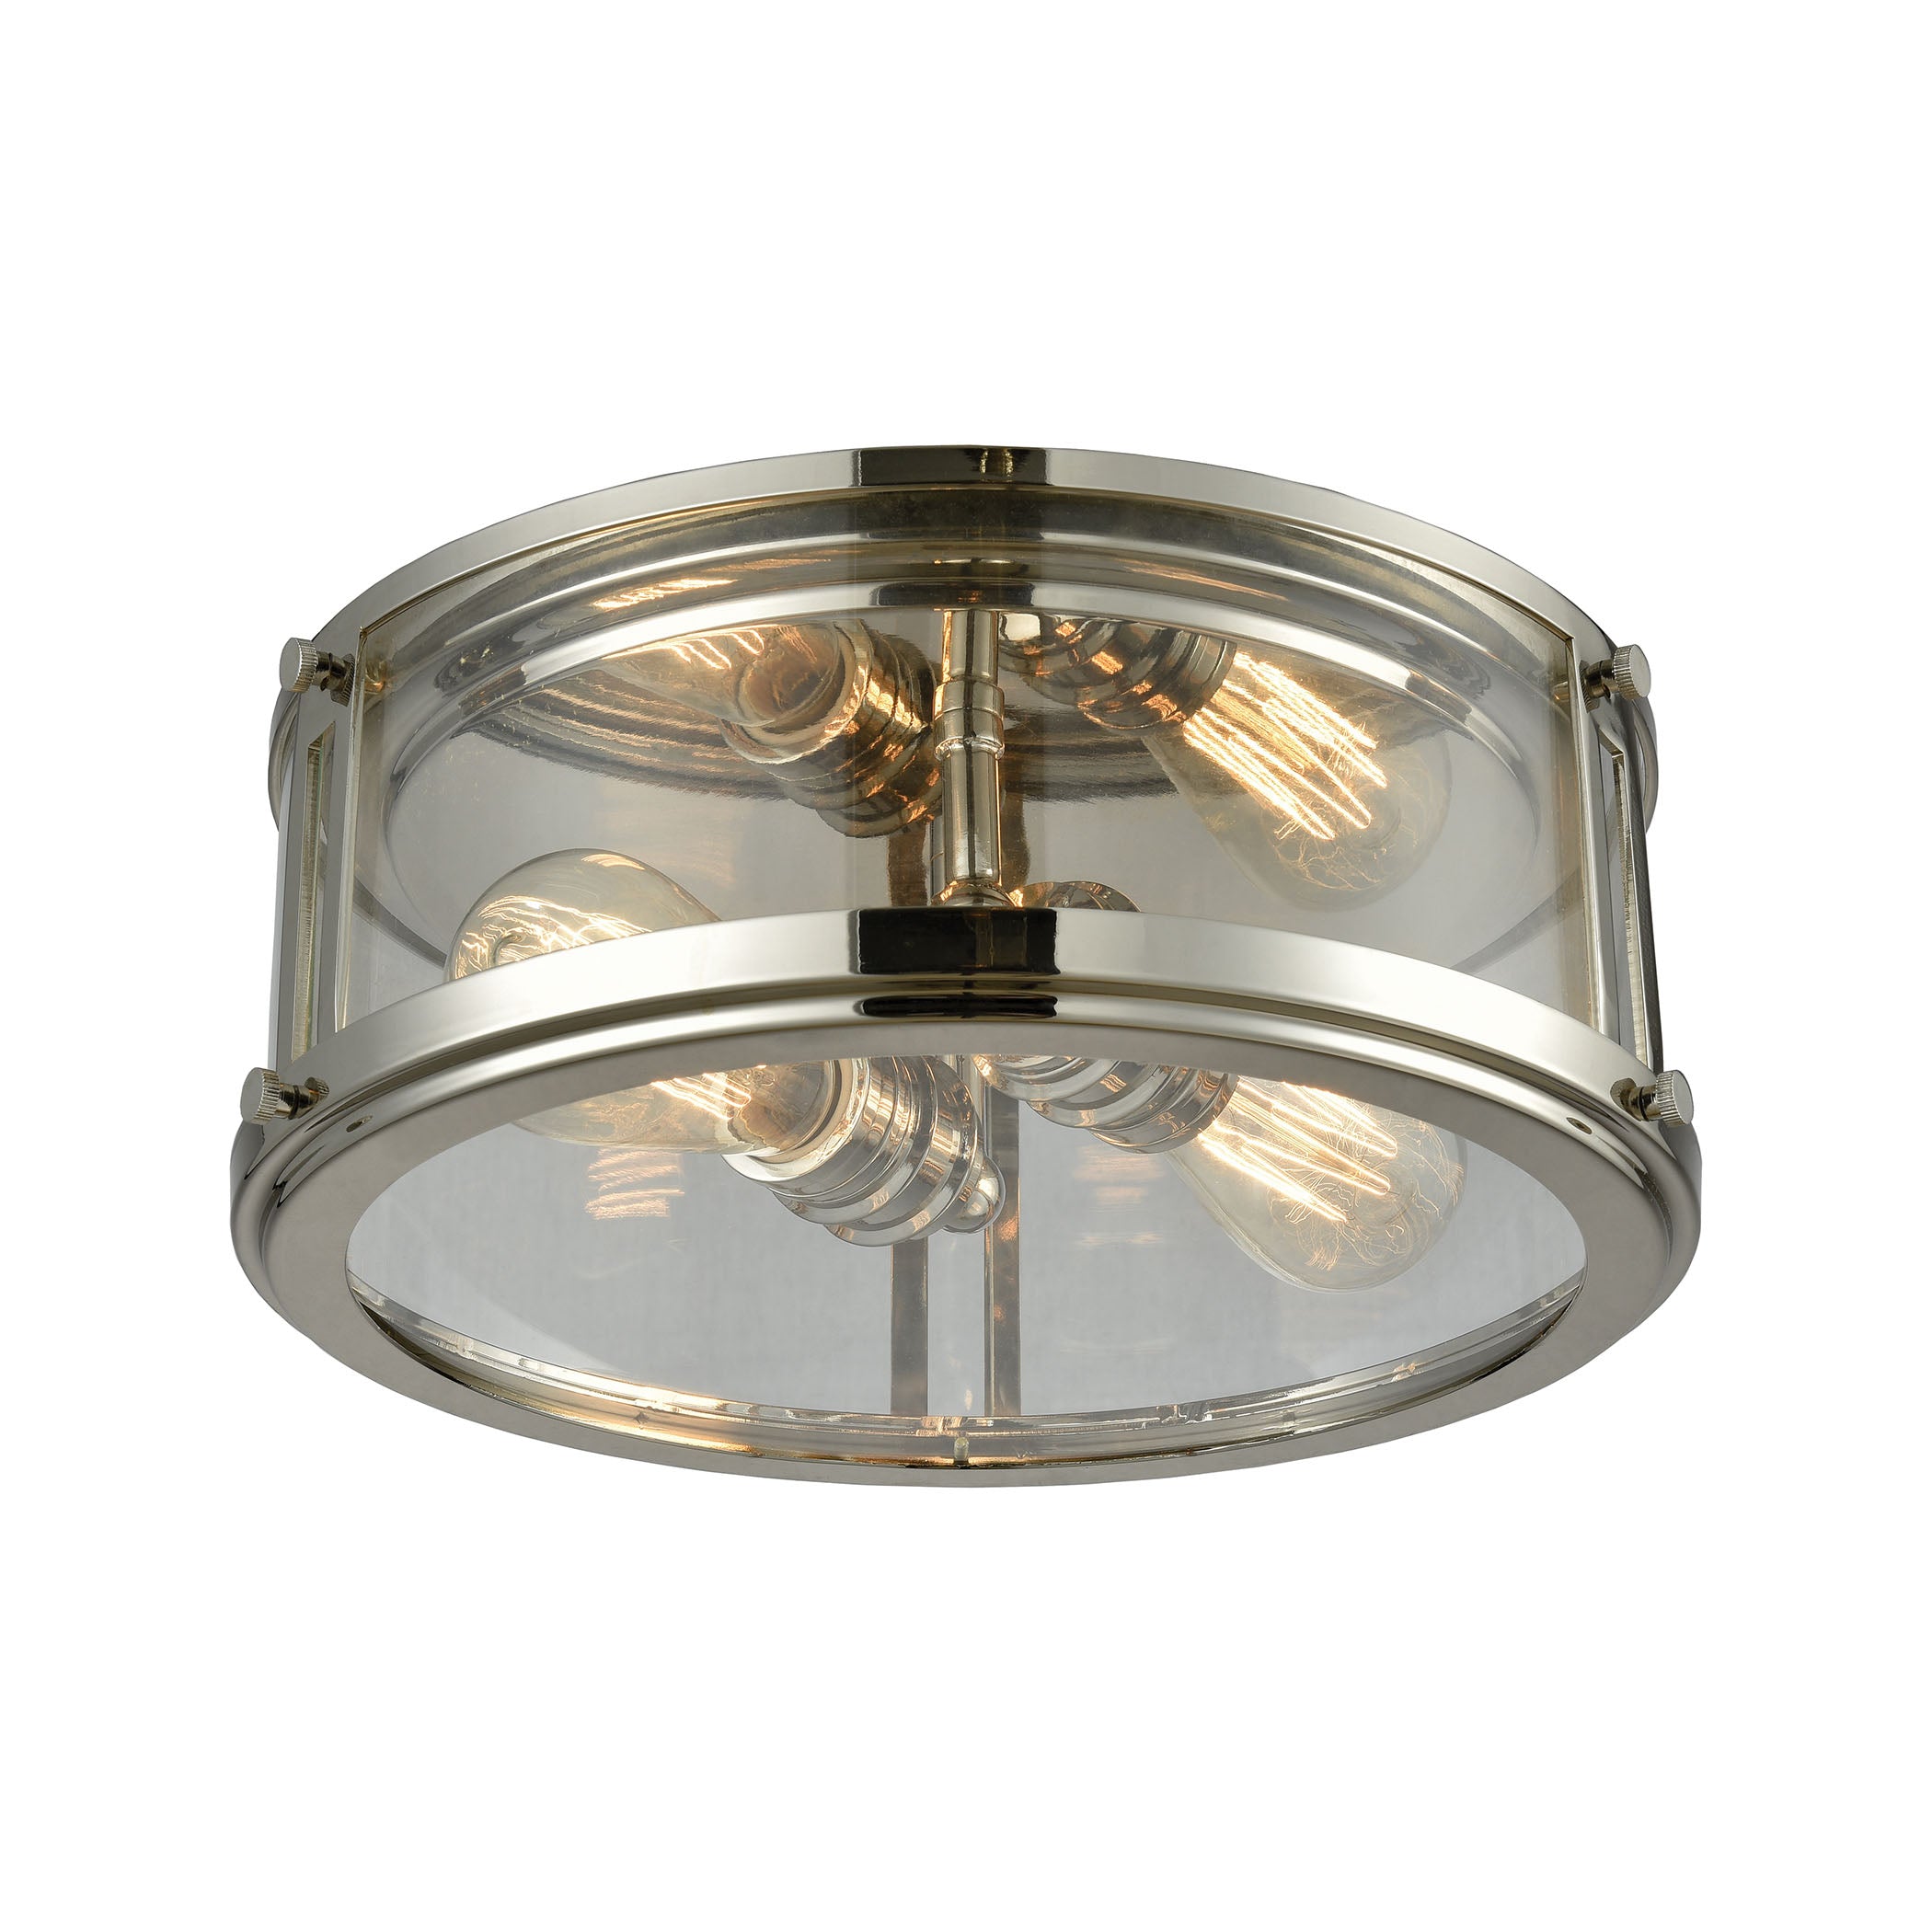 ELK Lighting 11850/2 Coby 2-Light Flush Mount in Polished Nickel with Clear Glass